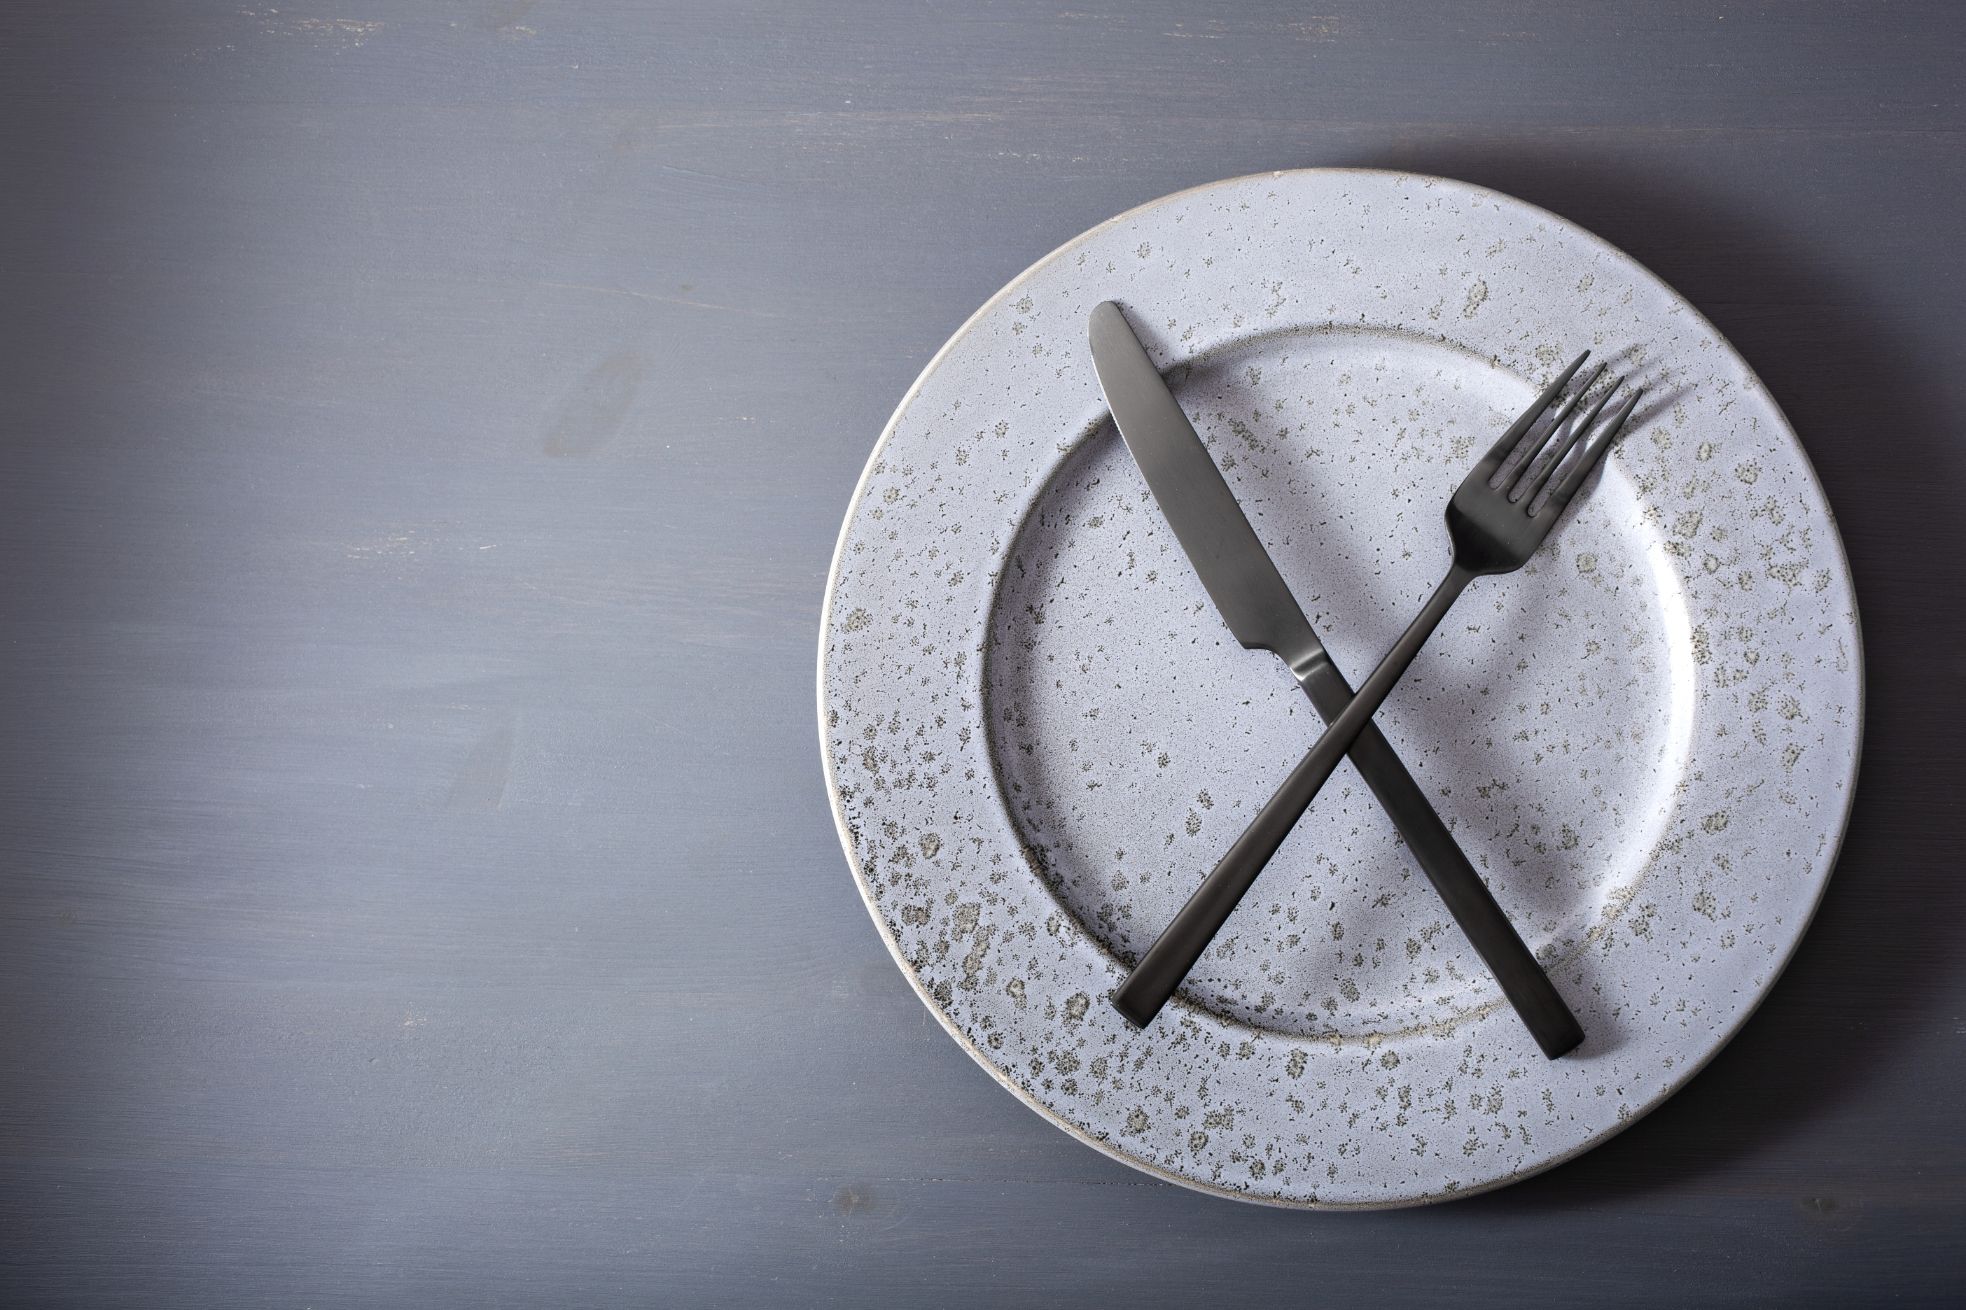 Empty dinner plate with silverware.